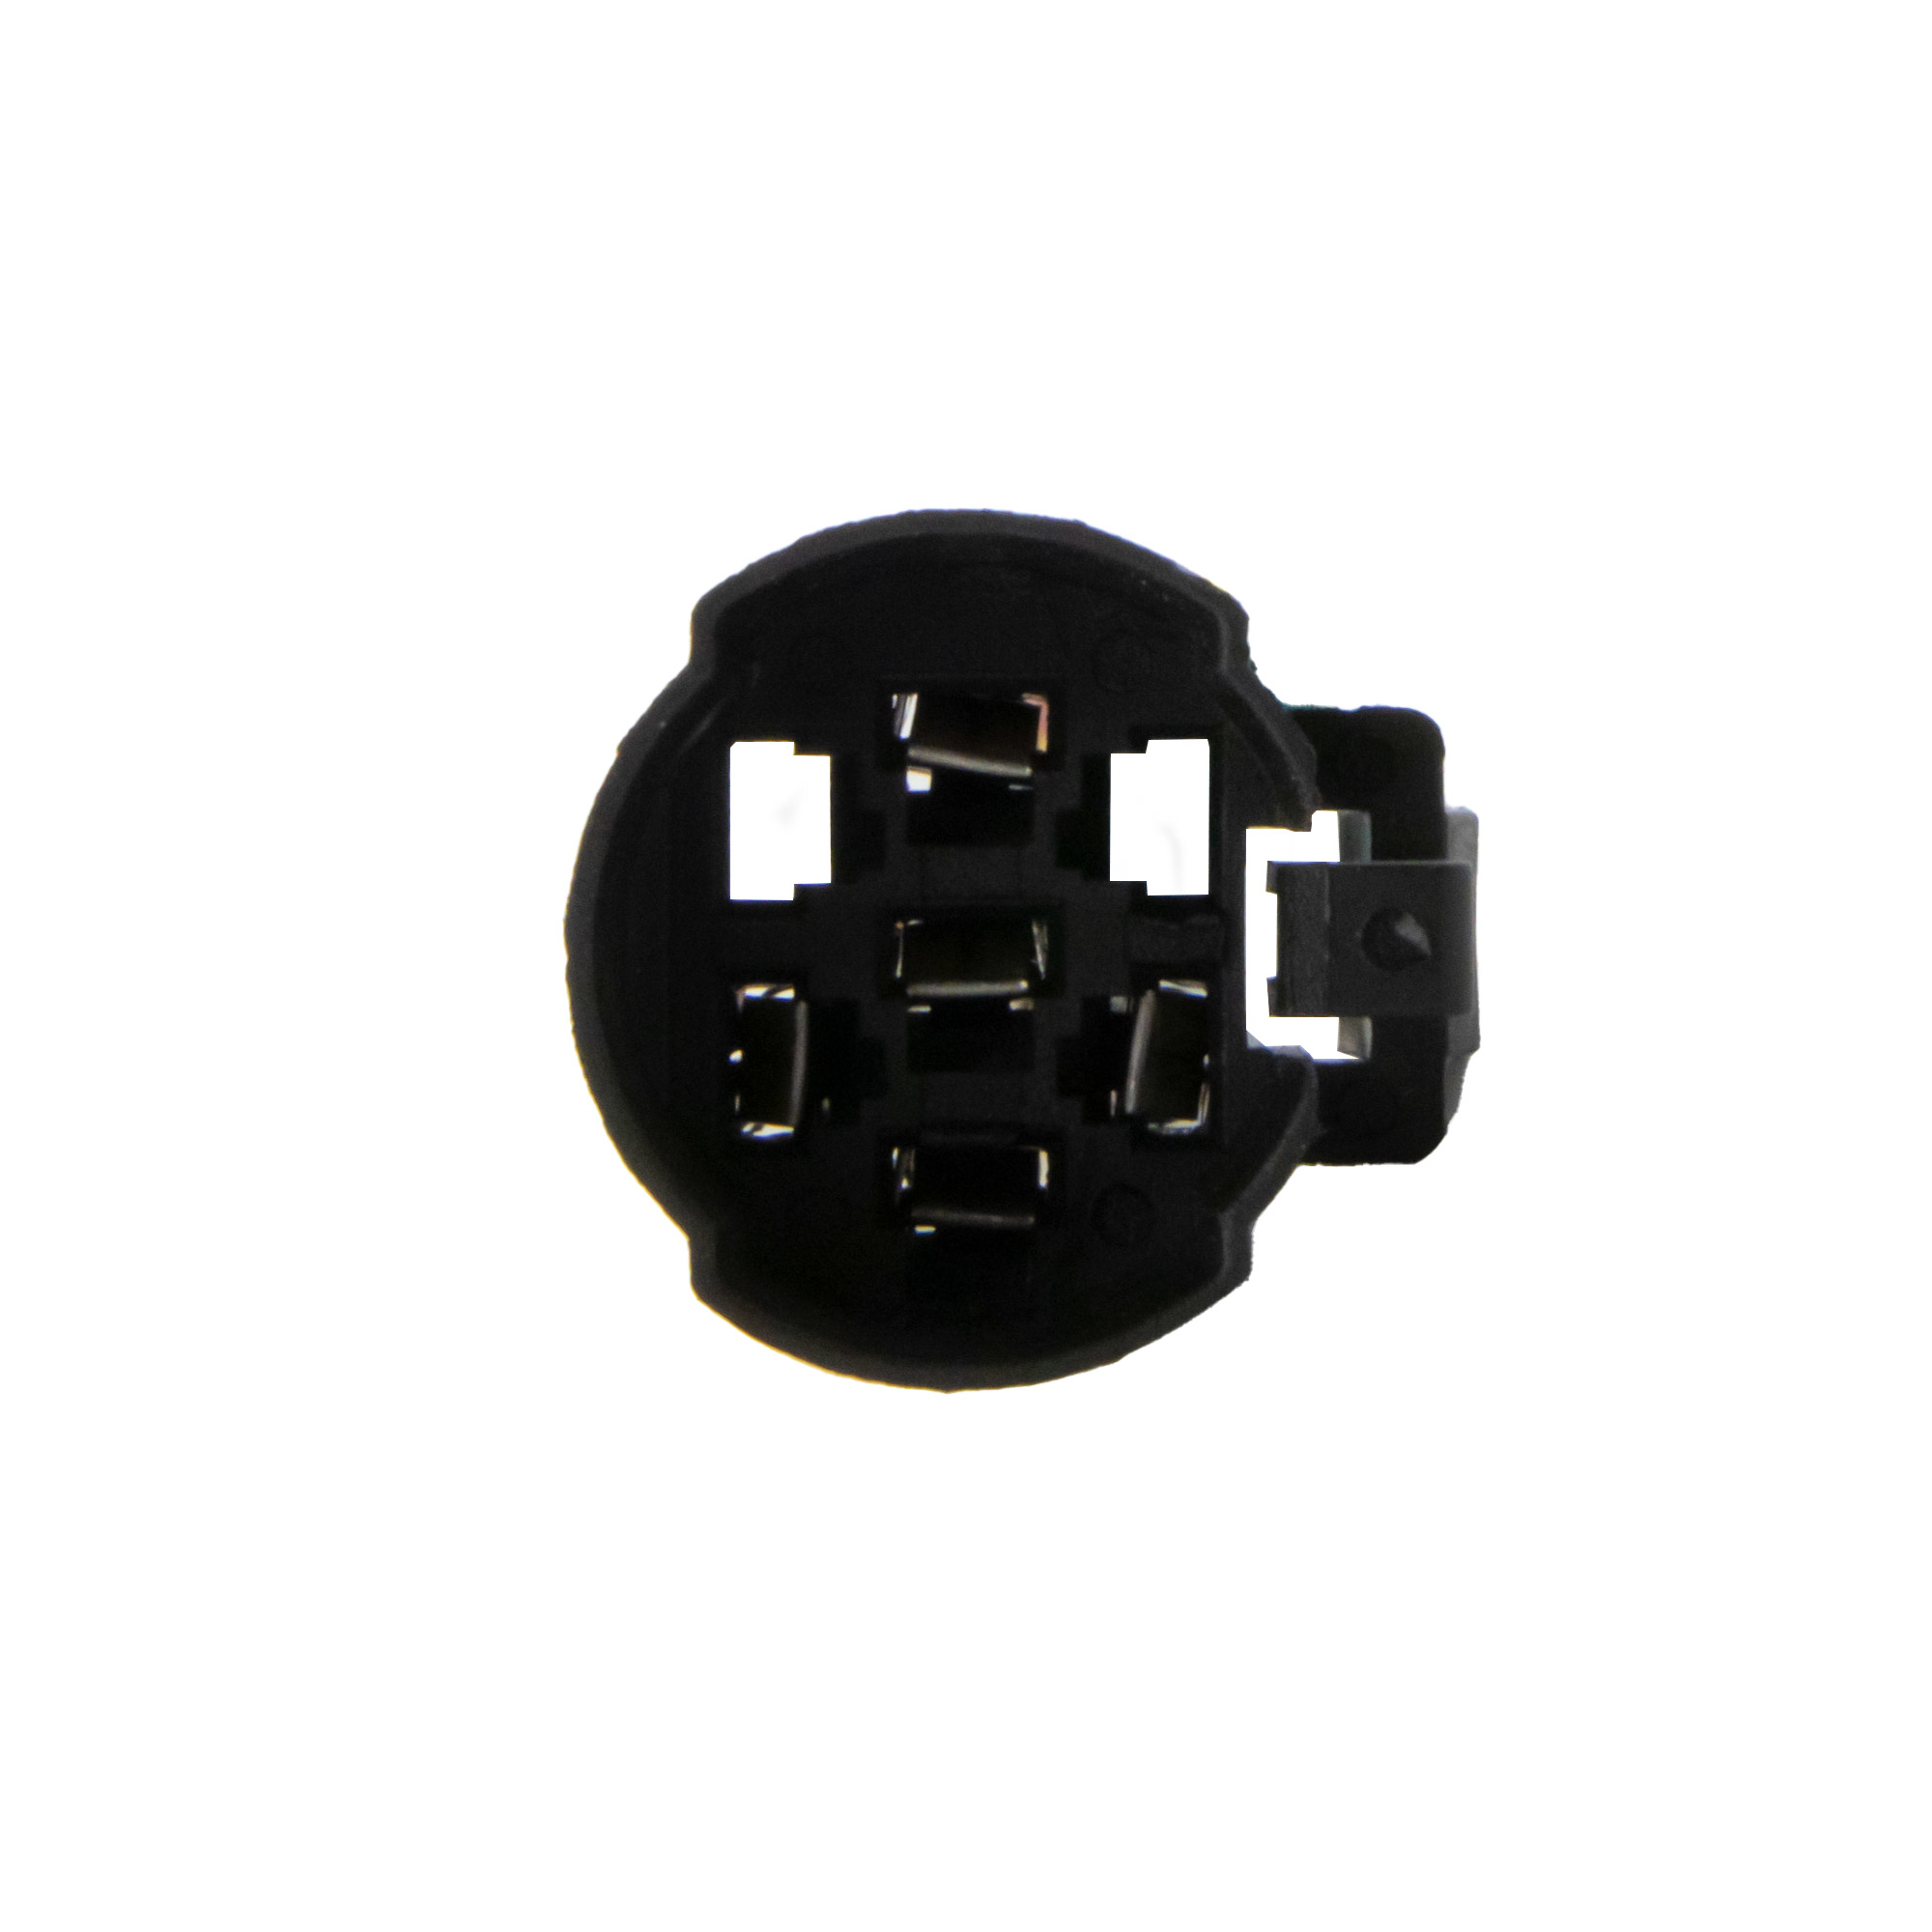 Plug-in connector for Ø16mm Push-button